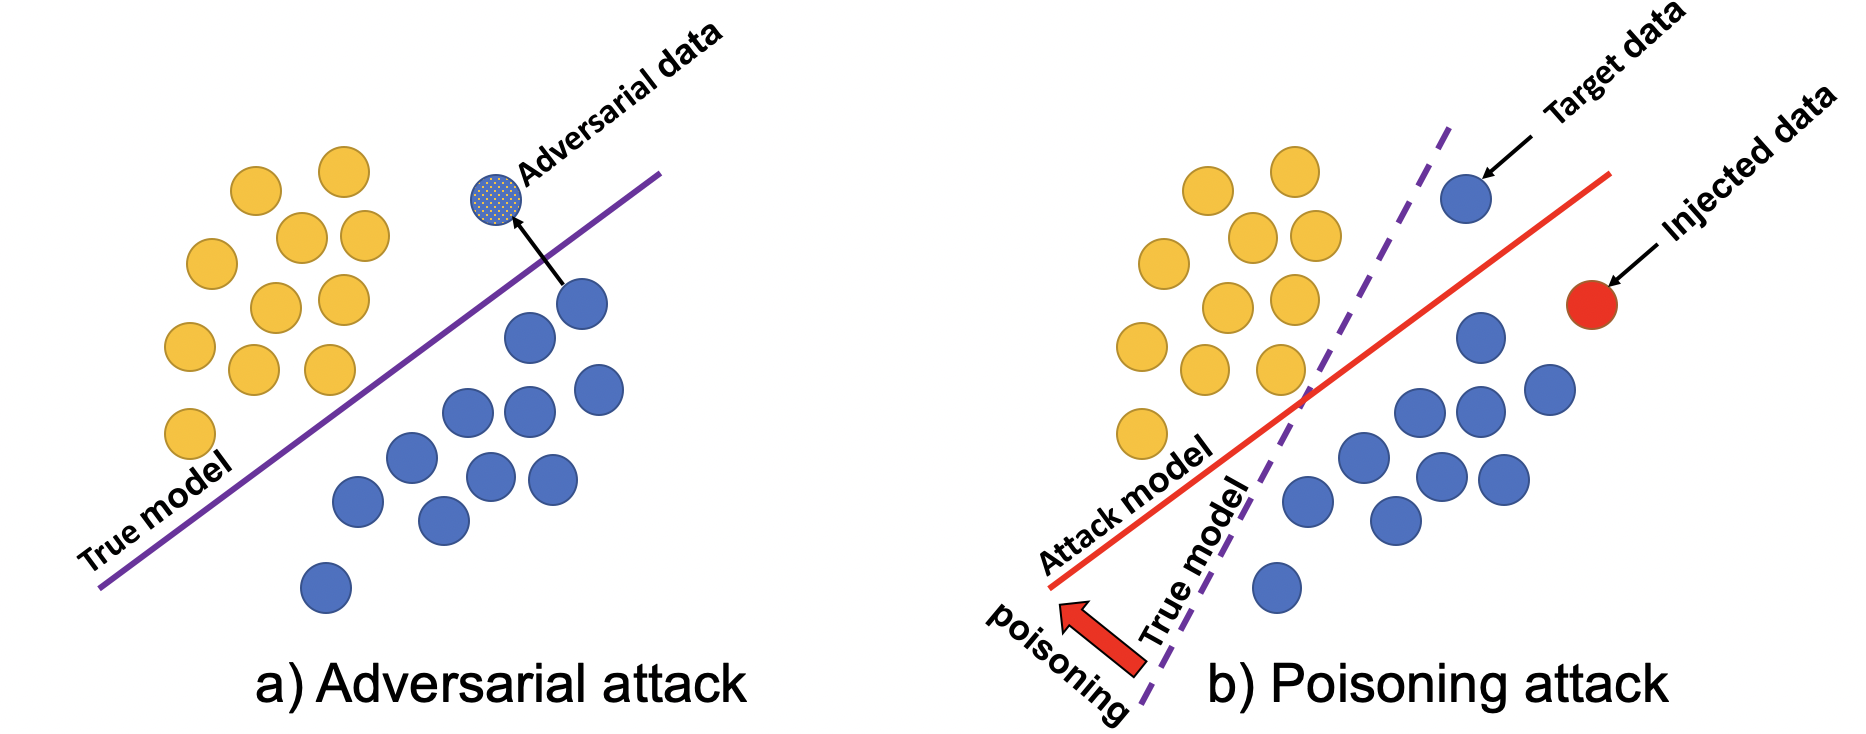 Manipulating Recommender Systems: A Survey of Poisoning Attacks and Countermeasures